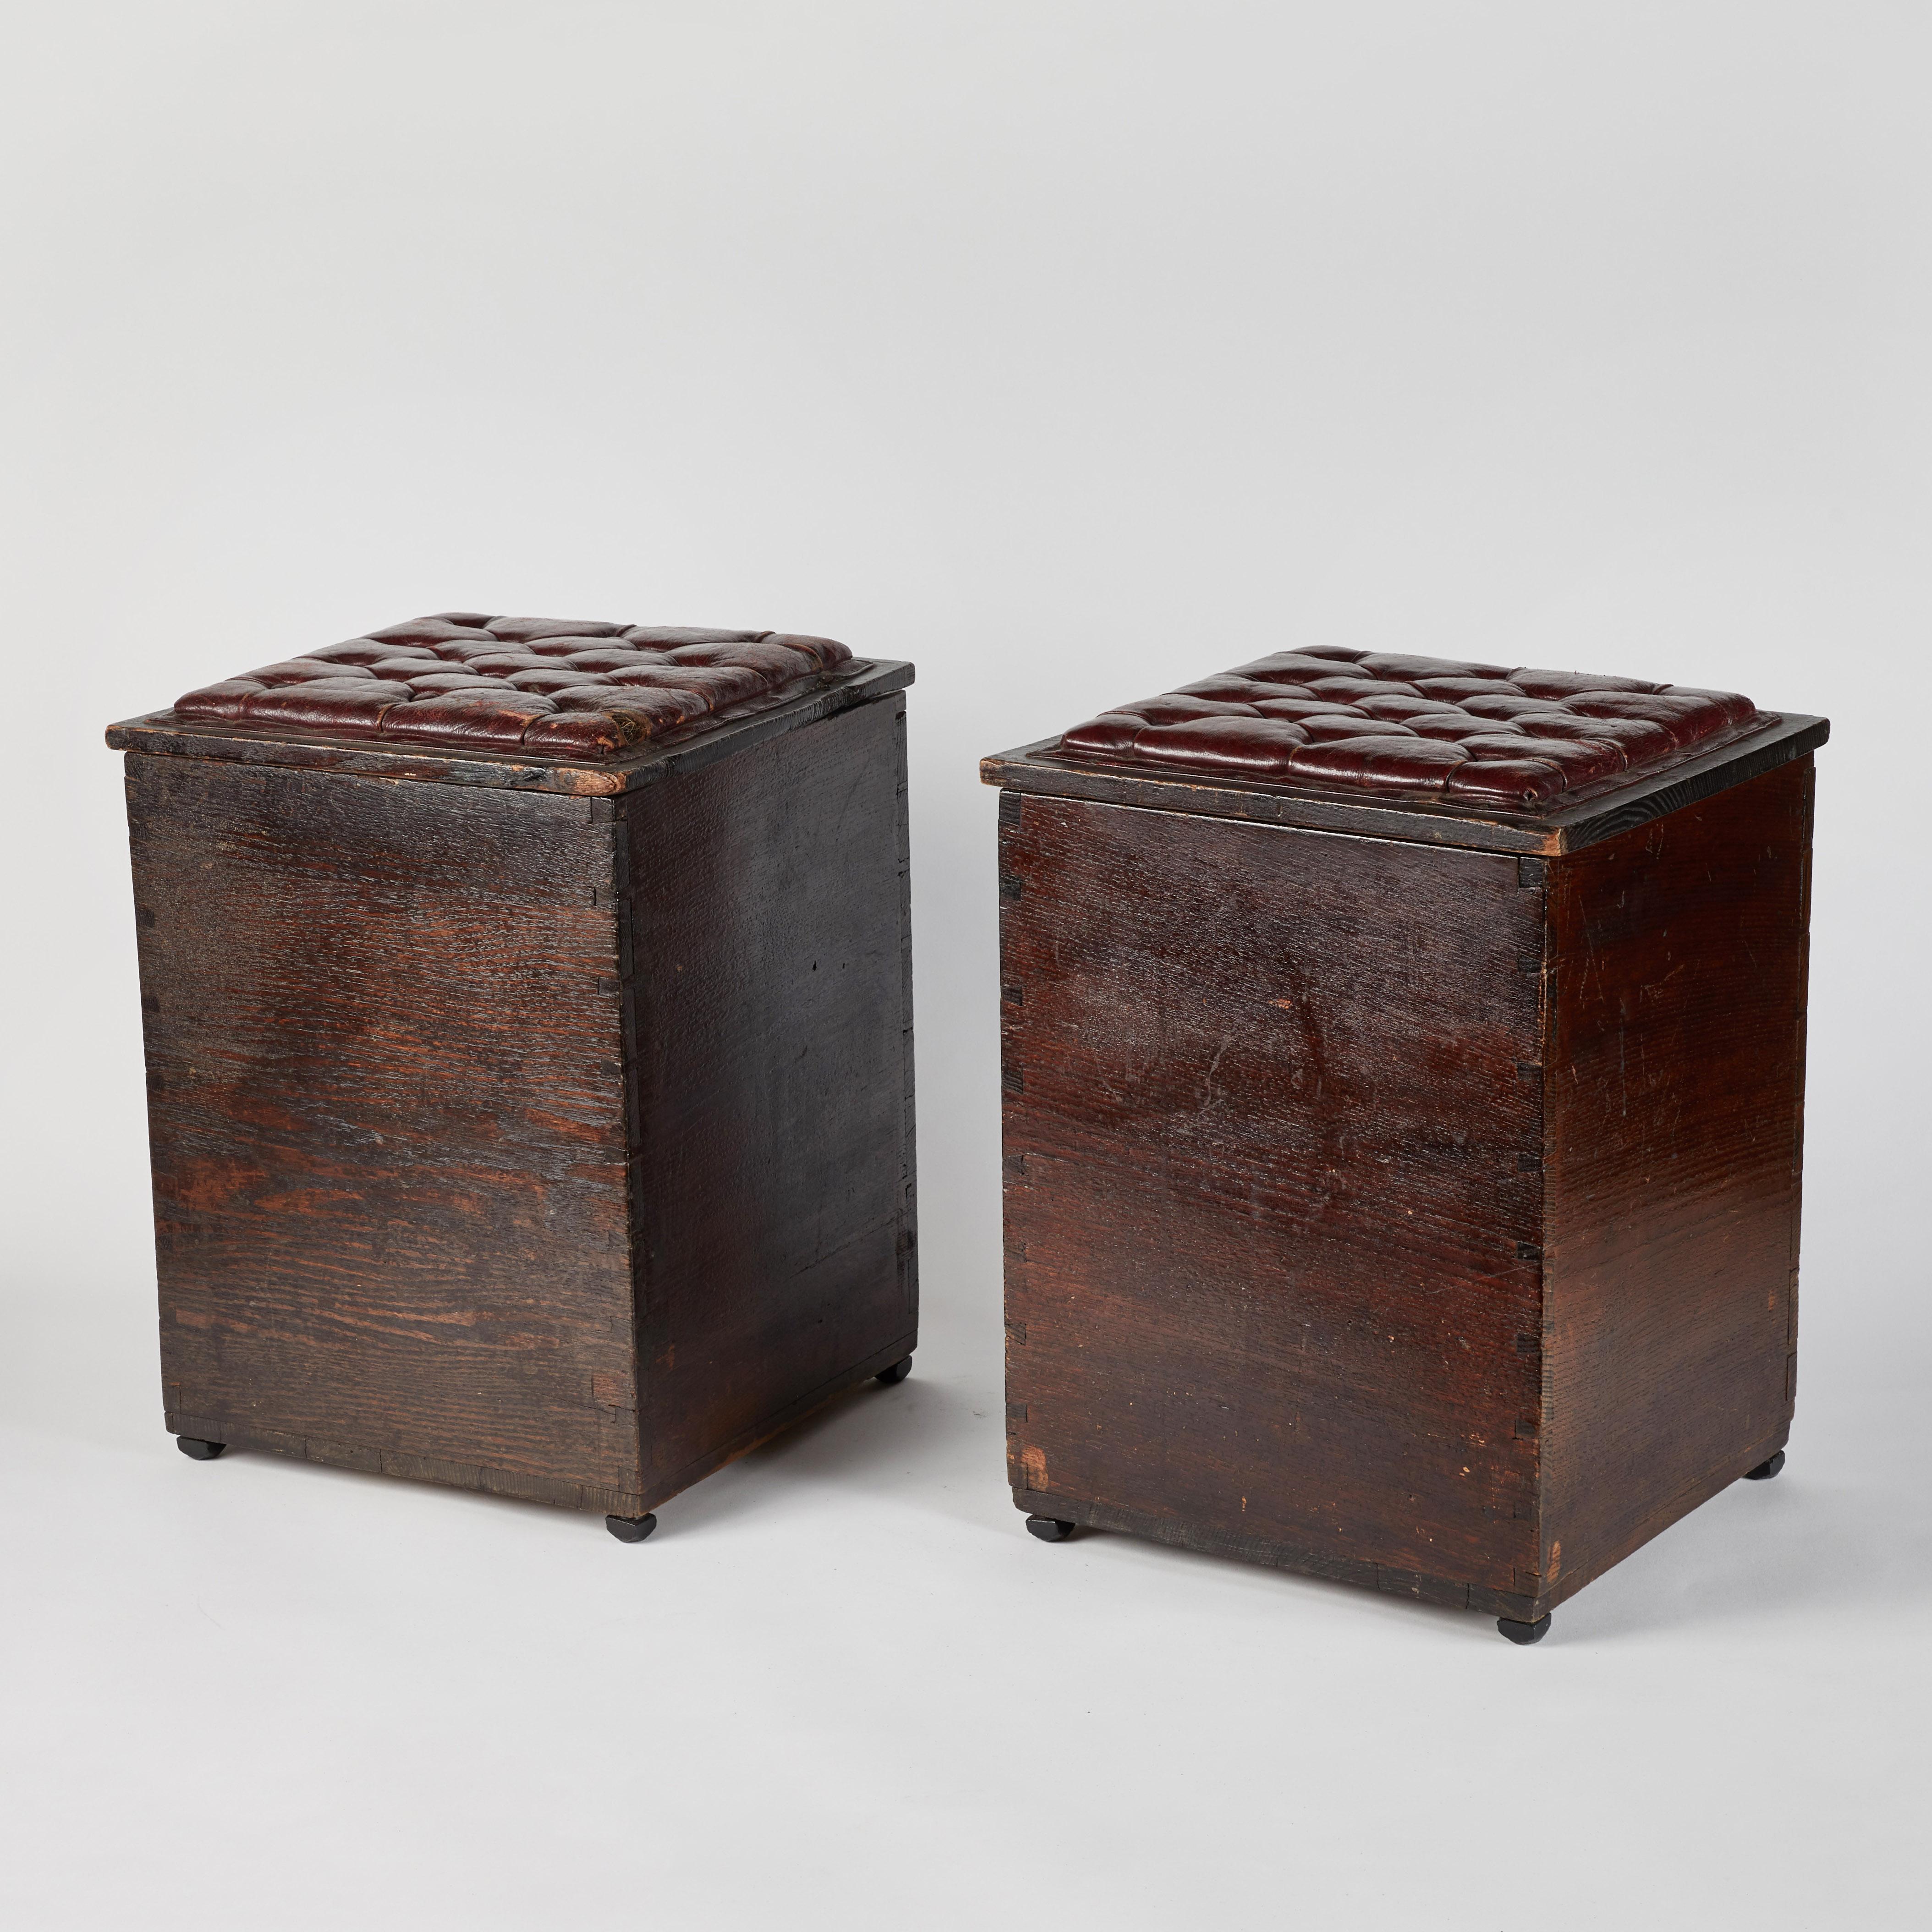 Late Victorian Pair of Wood and Tufted Leather Topped Stools from Late 19th Century England